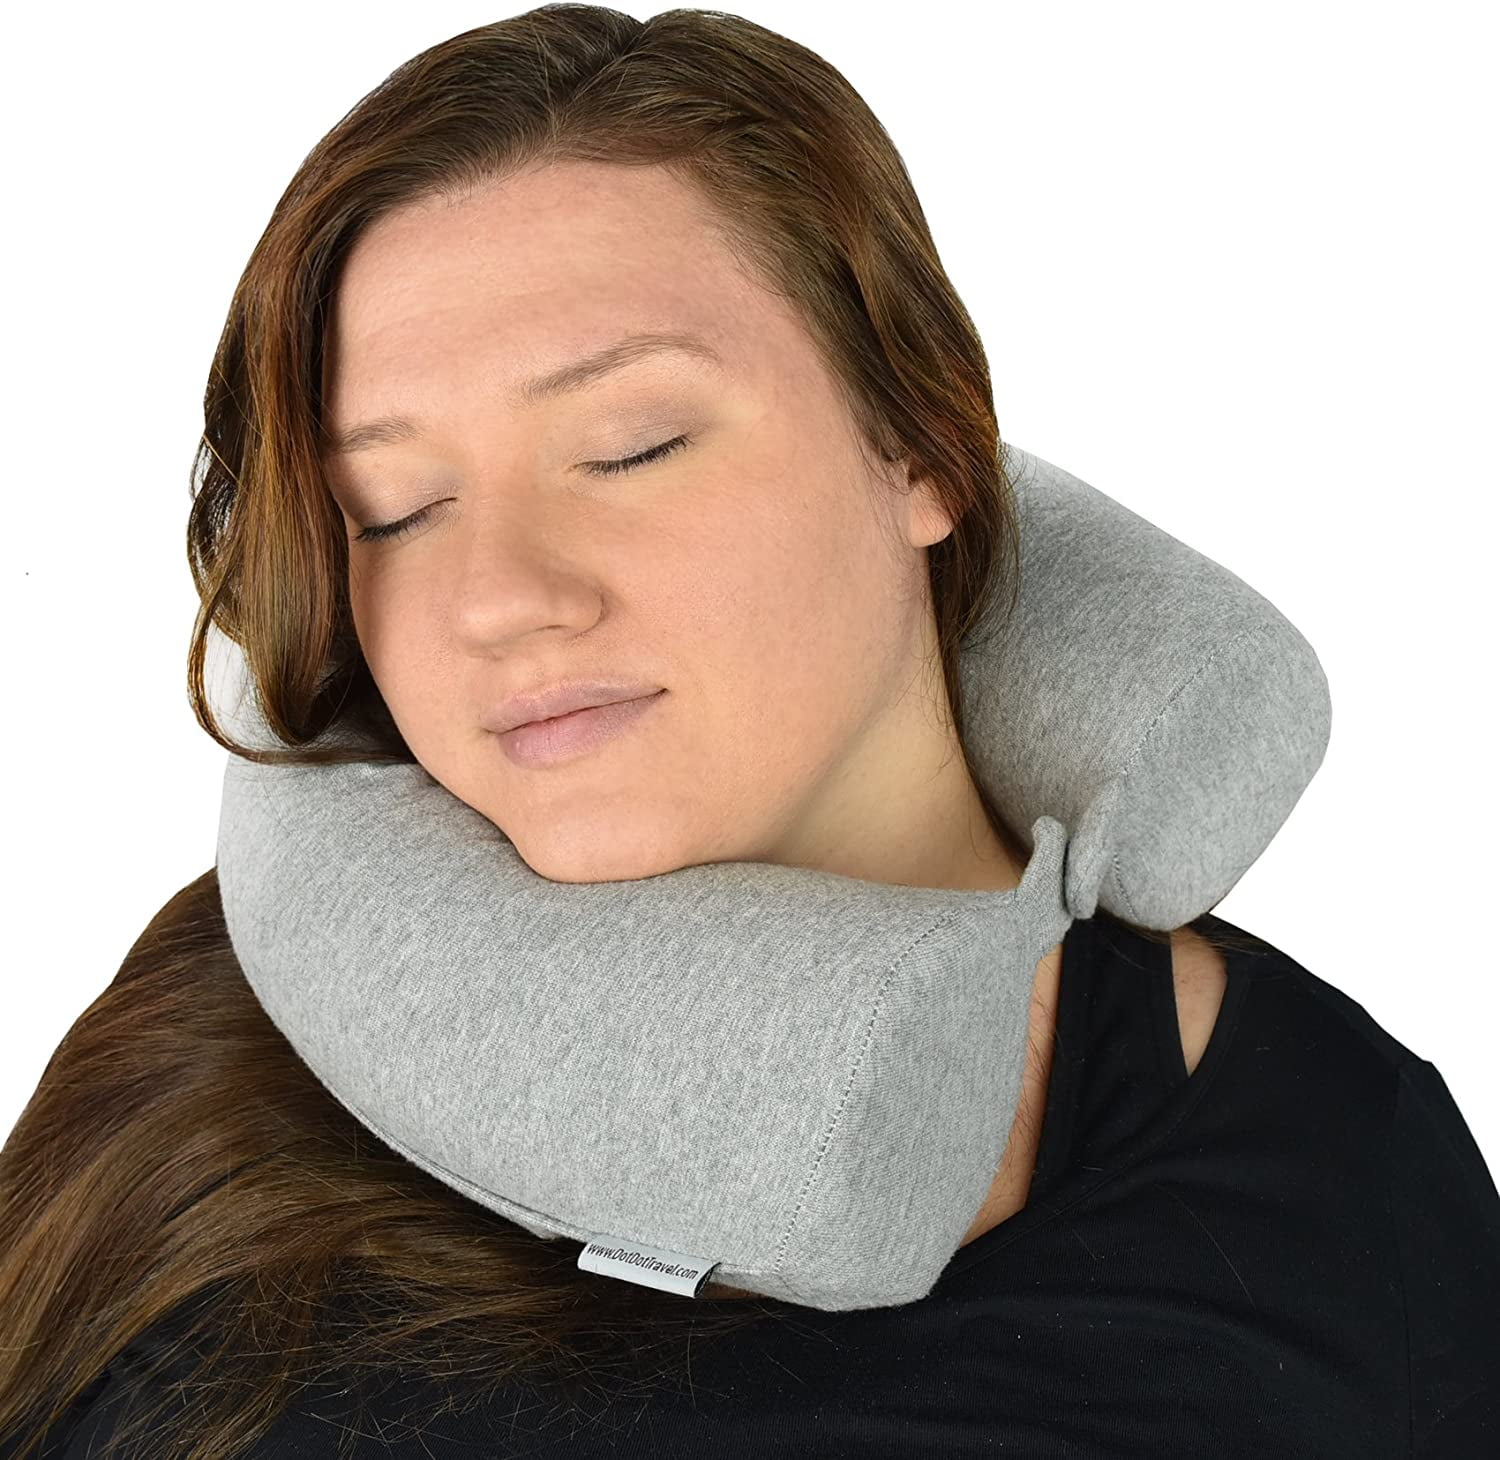 Lumbar Bendable Roll Pillow.Best for Side Train or at Home and Leg Support Stomach and Back Sleepers Adjustable Chin Jetsey Twist Memory Foam Travel Pillow for Neck Traveling on Airplane Bus